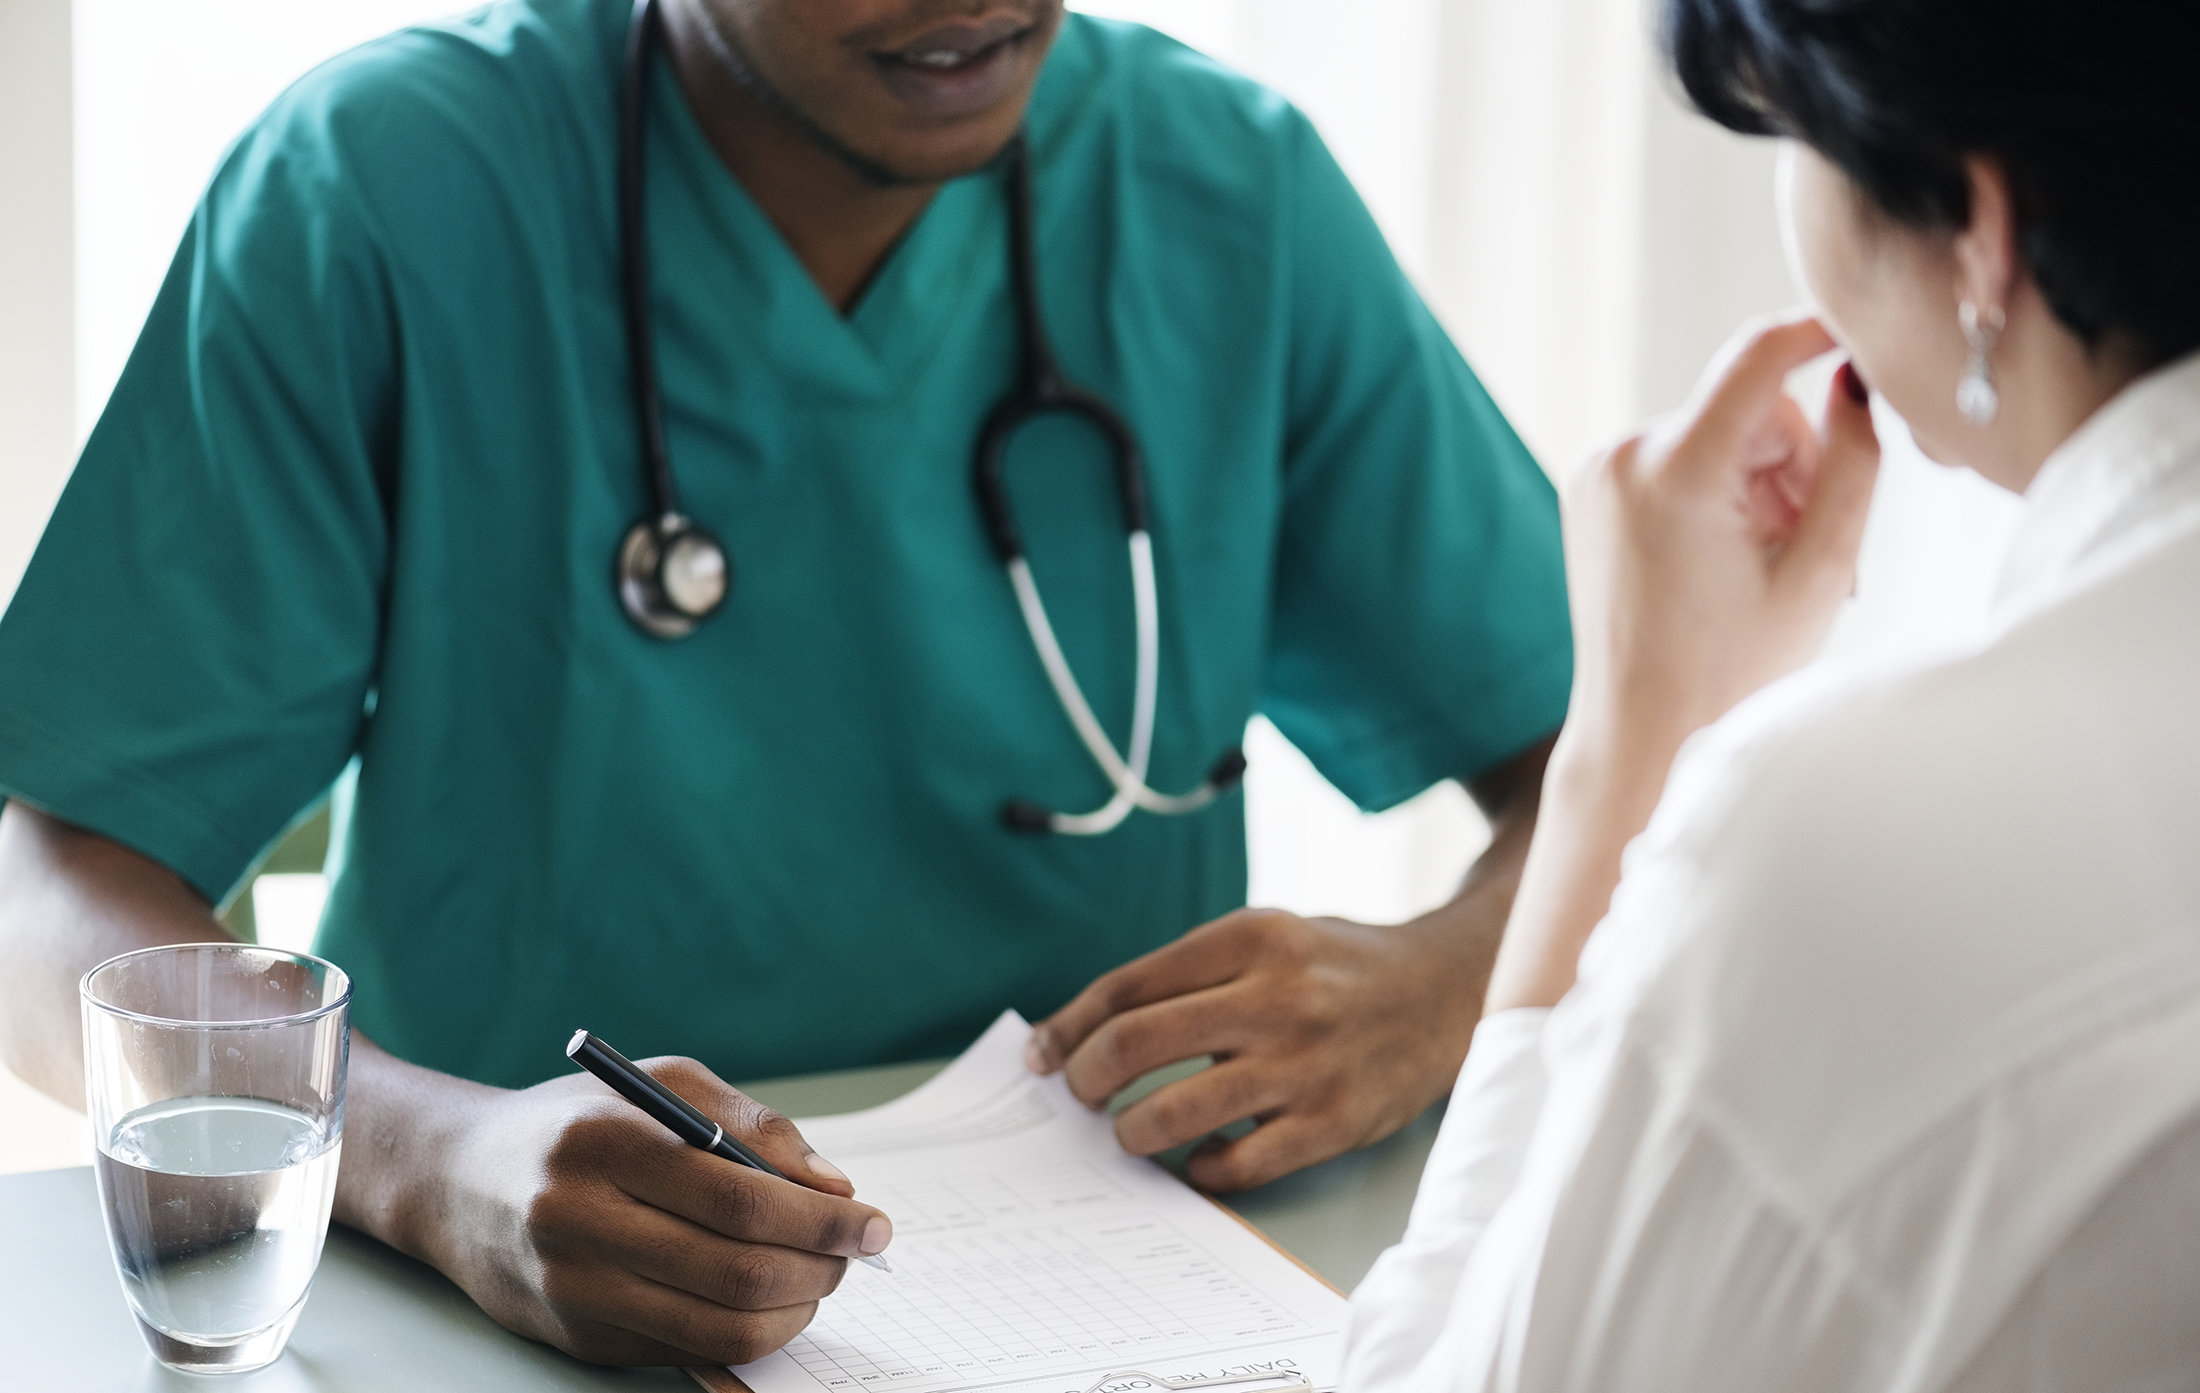 Healthcare worker writes patient details on a piece of paper